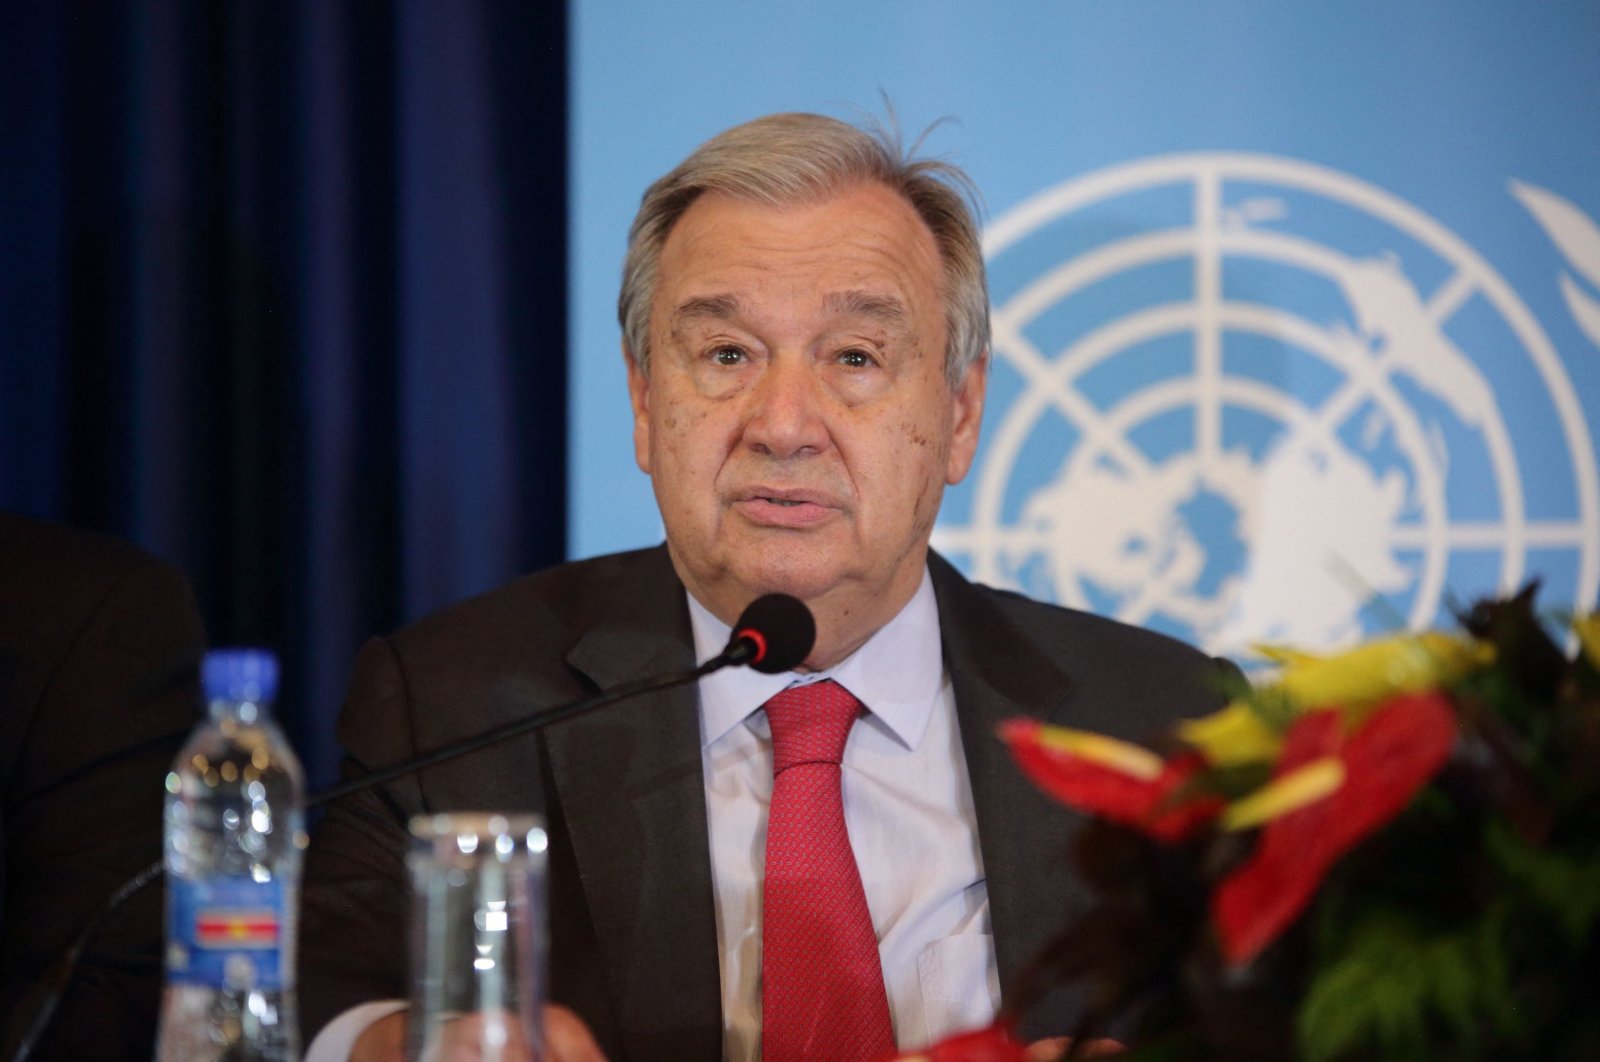 U.N. Secretary-General Antonio Guterres and Suriname President Chan Santokhi (out of frame) deliver a press conference at the presidential palace in Paramaribo, Suriname, on July 2, 2022. (AFP Photo)